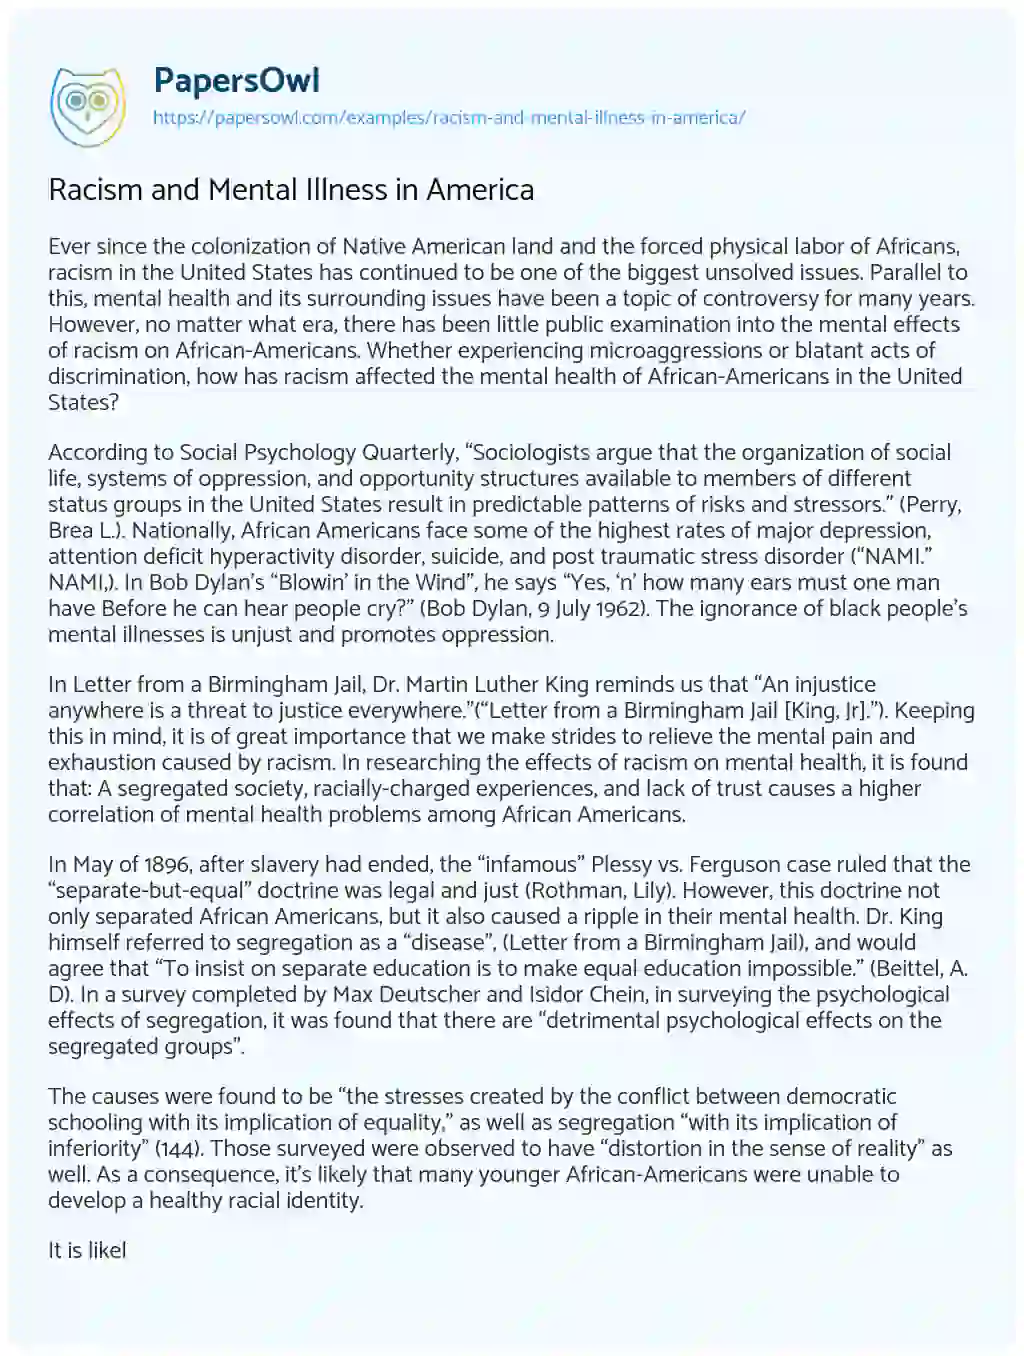 Essay on Racism and Mental Illness in America